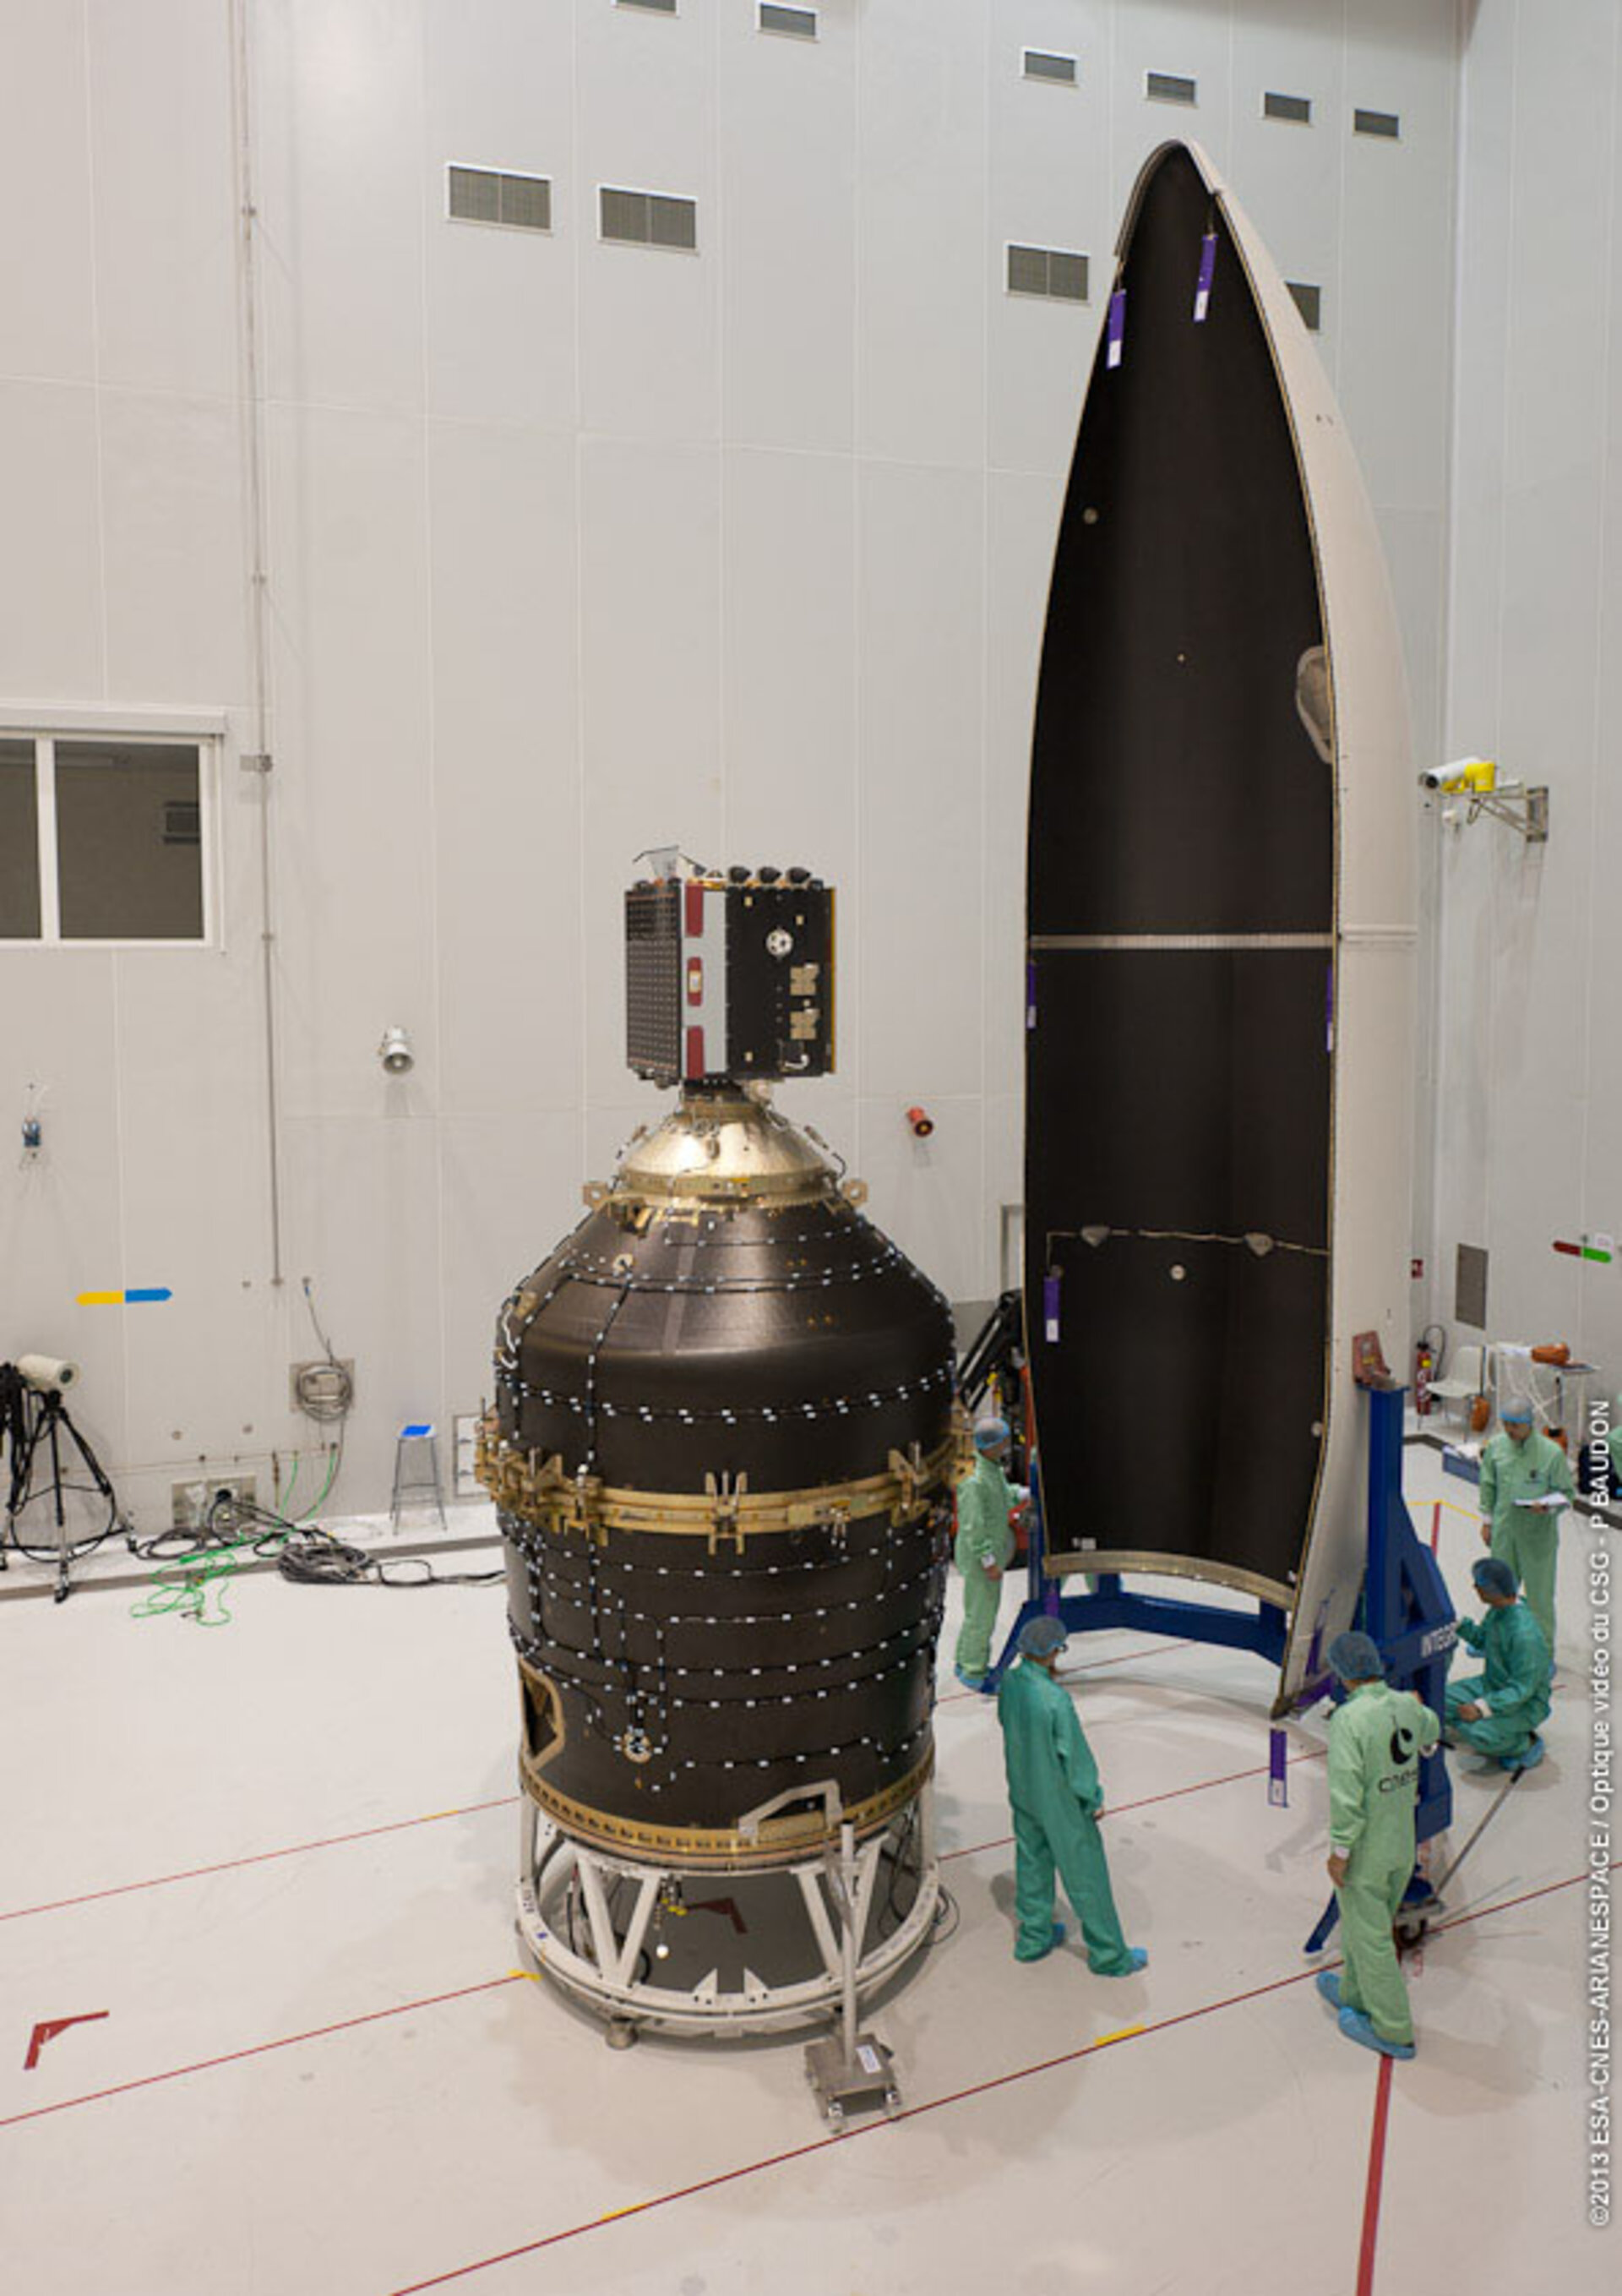 ClearSpace-1 will target the conical upper part of the payload adapter that delivered Proba-V into orbit